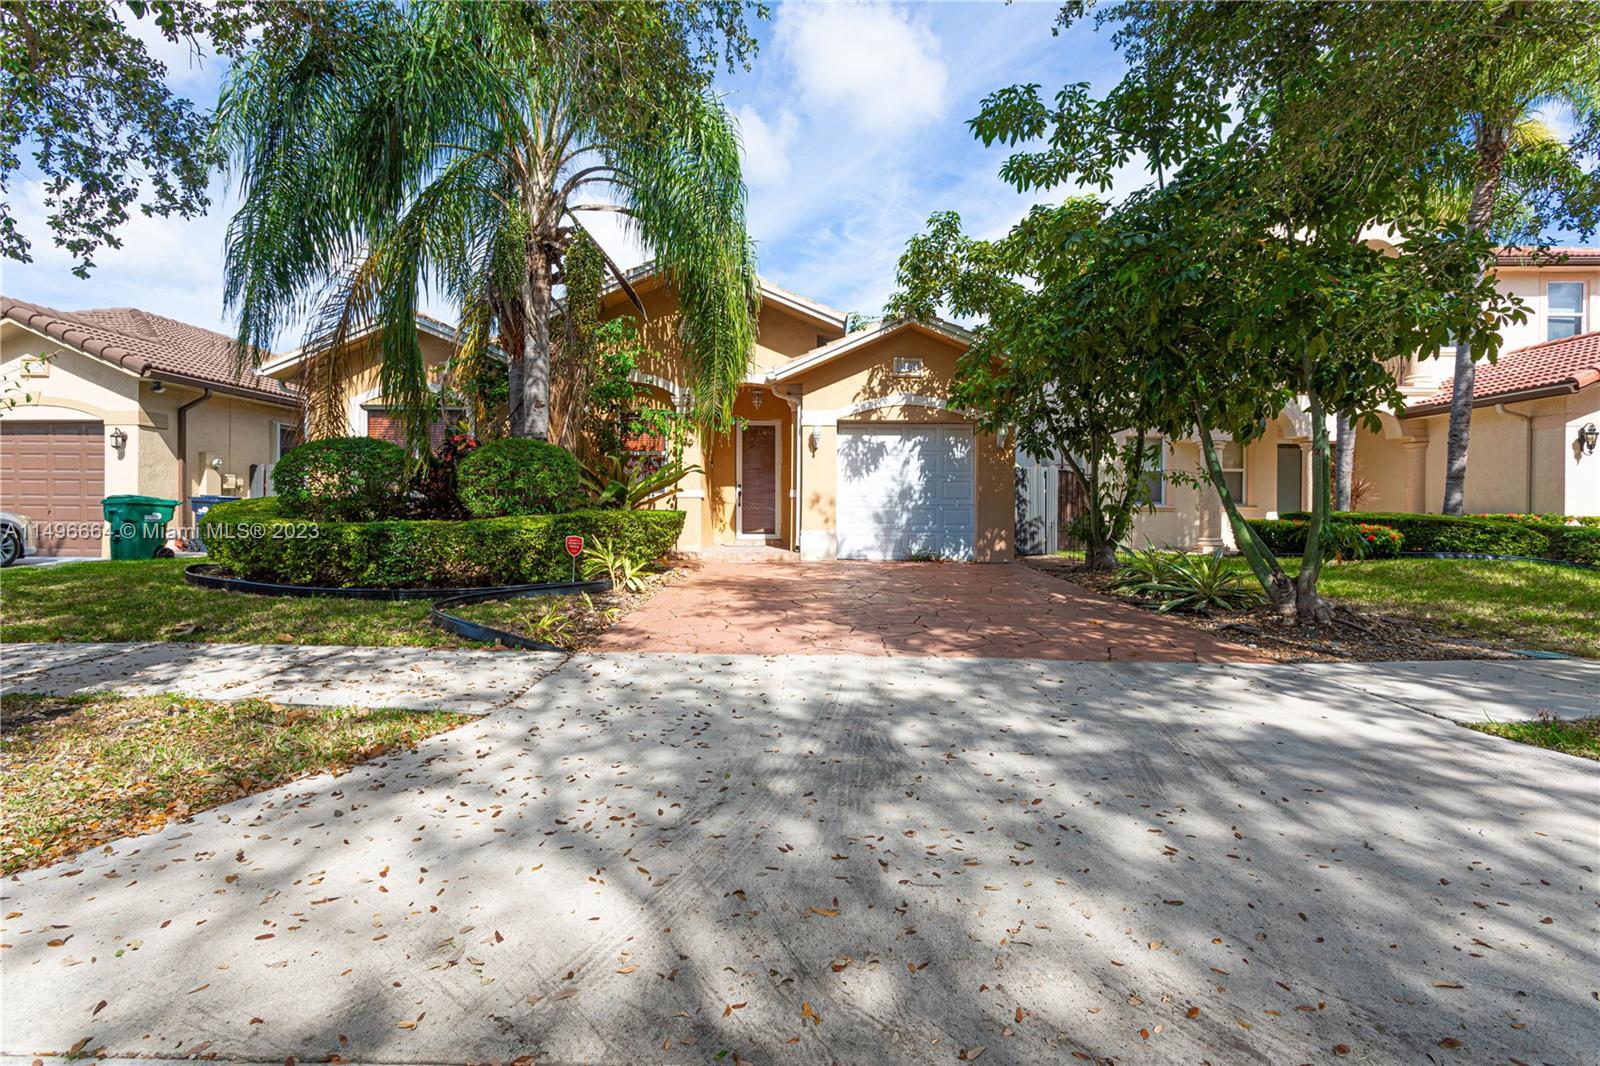 Photo of 8887 NW 139th Ter in Miami Lakes, FL